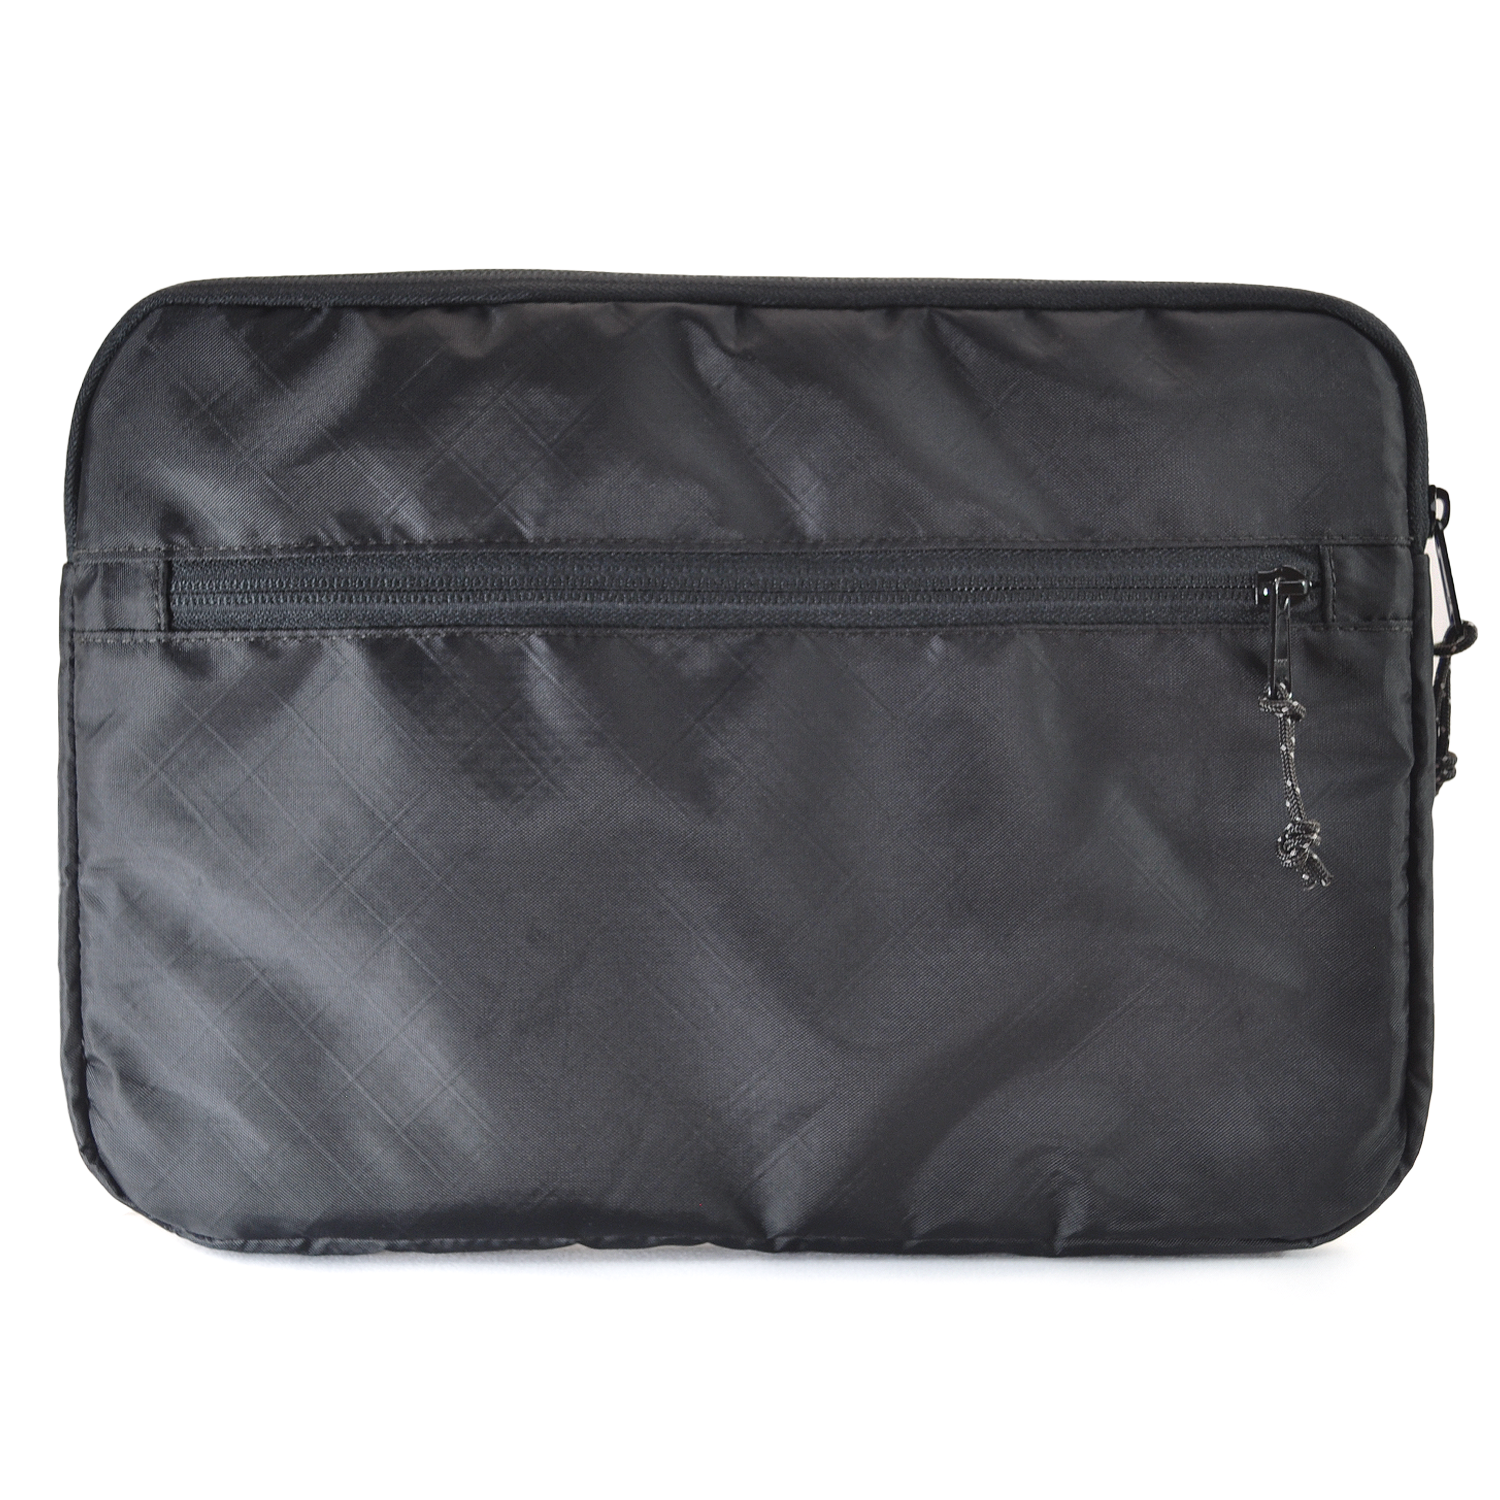 Flowfold Ally Laptop Case & water repellent recycled laptop sleeve made in USA, recycled jet black